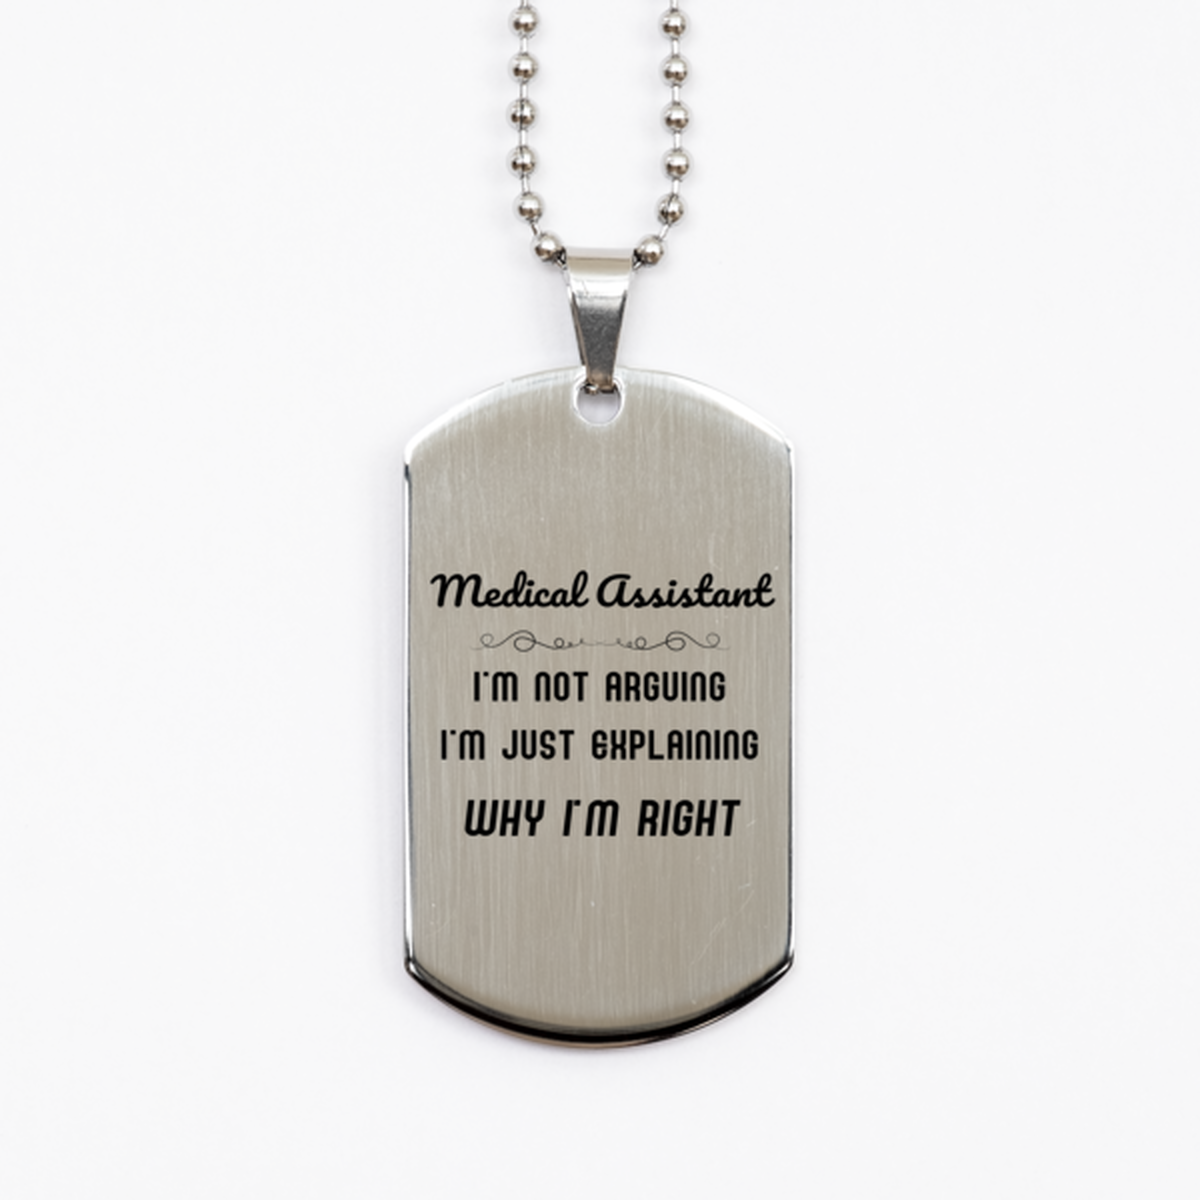 Medical Assistant I'm not Arguing. I'm Just Explaining Why I'm RIGHT Silver Dog Tag, Funny Saying Quote Medical Assistant Gifts For Medical Assistant Graduation Birthday Christmas Gifts for Men Women Coworker